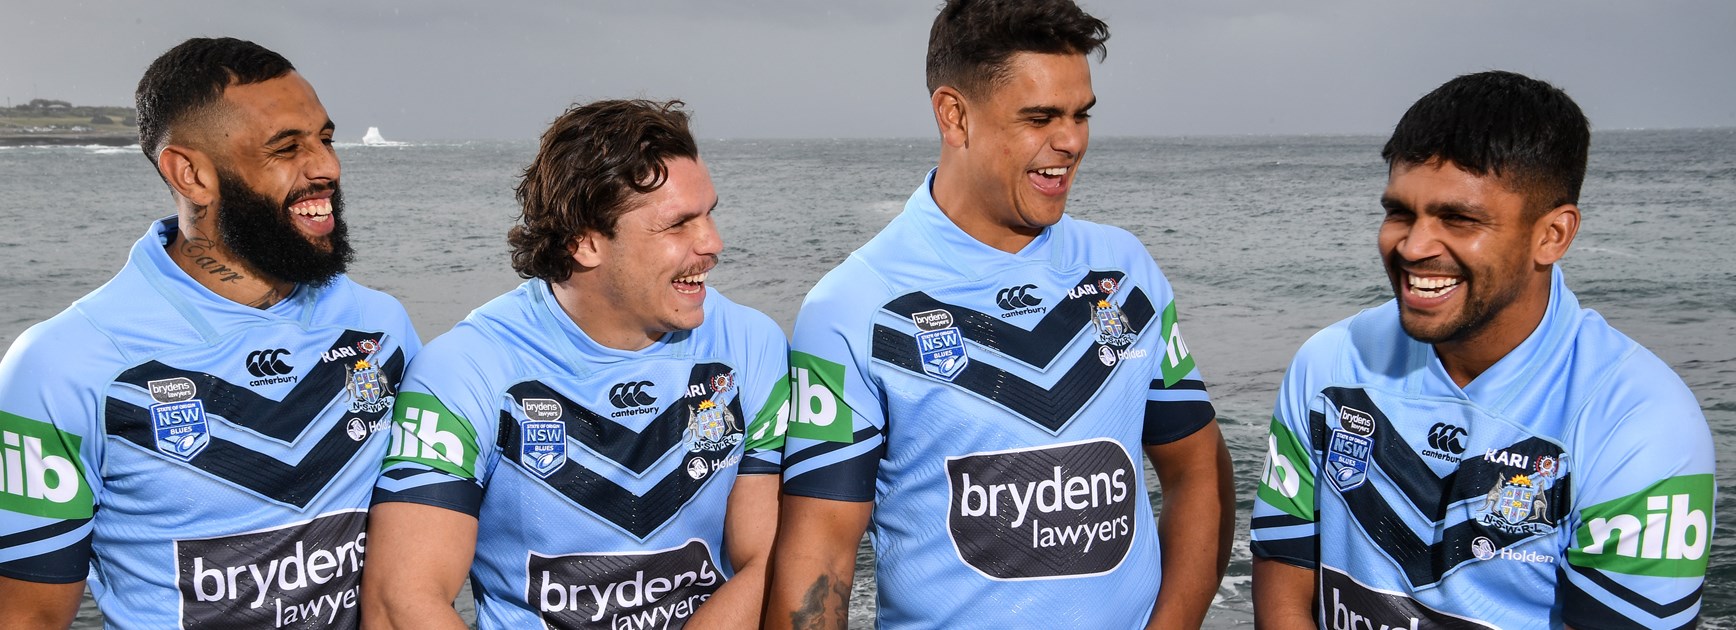 The NSW Blues Indigenous players Josh Addo-Carr, James Roberts, Latrell Mitchell and Tyrone Peachey